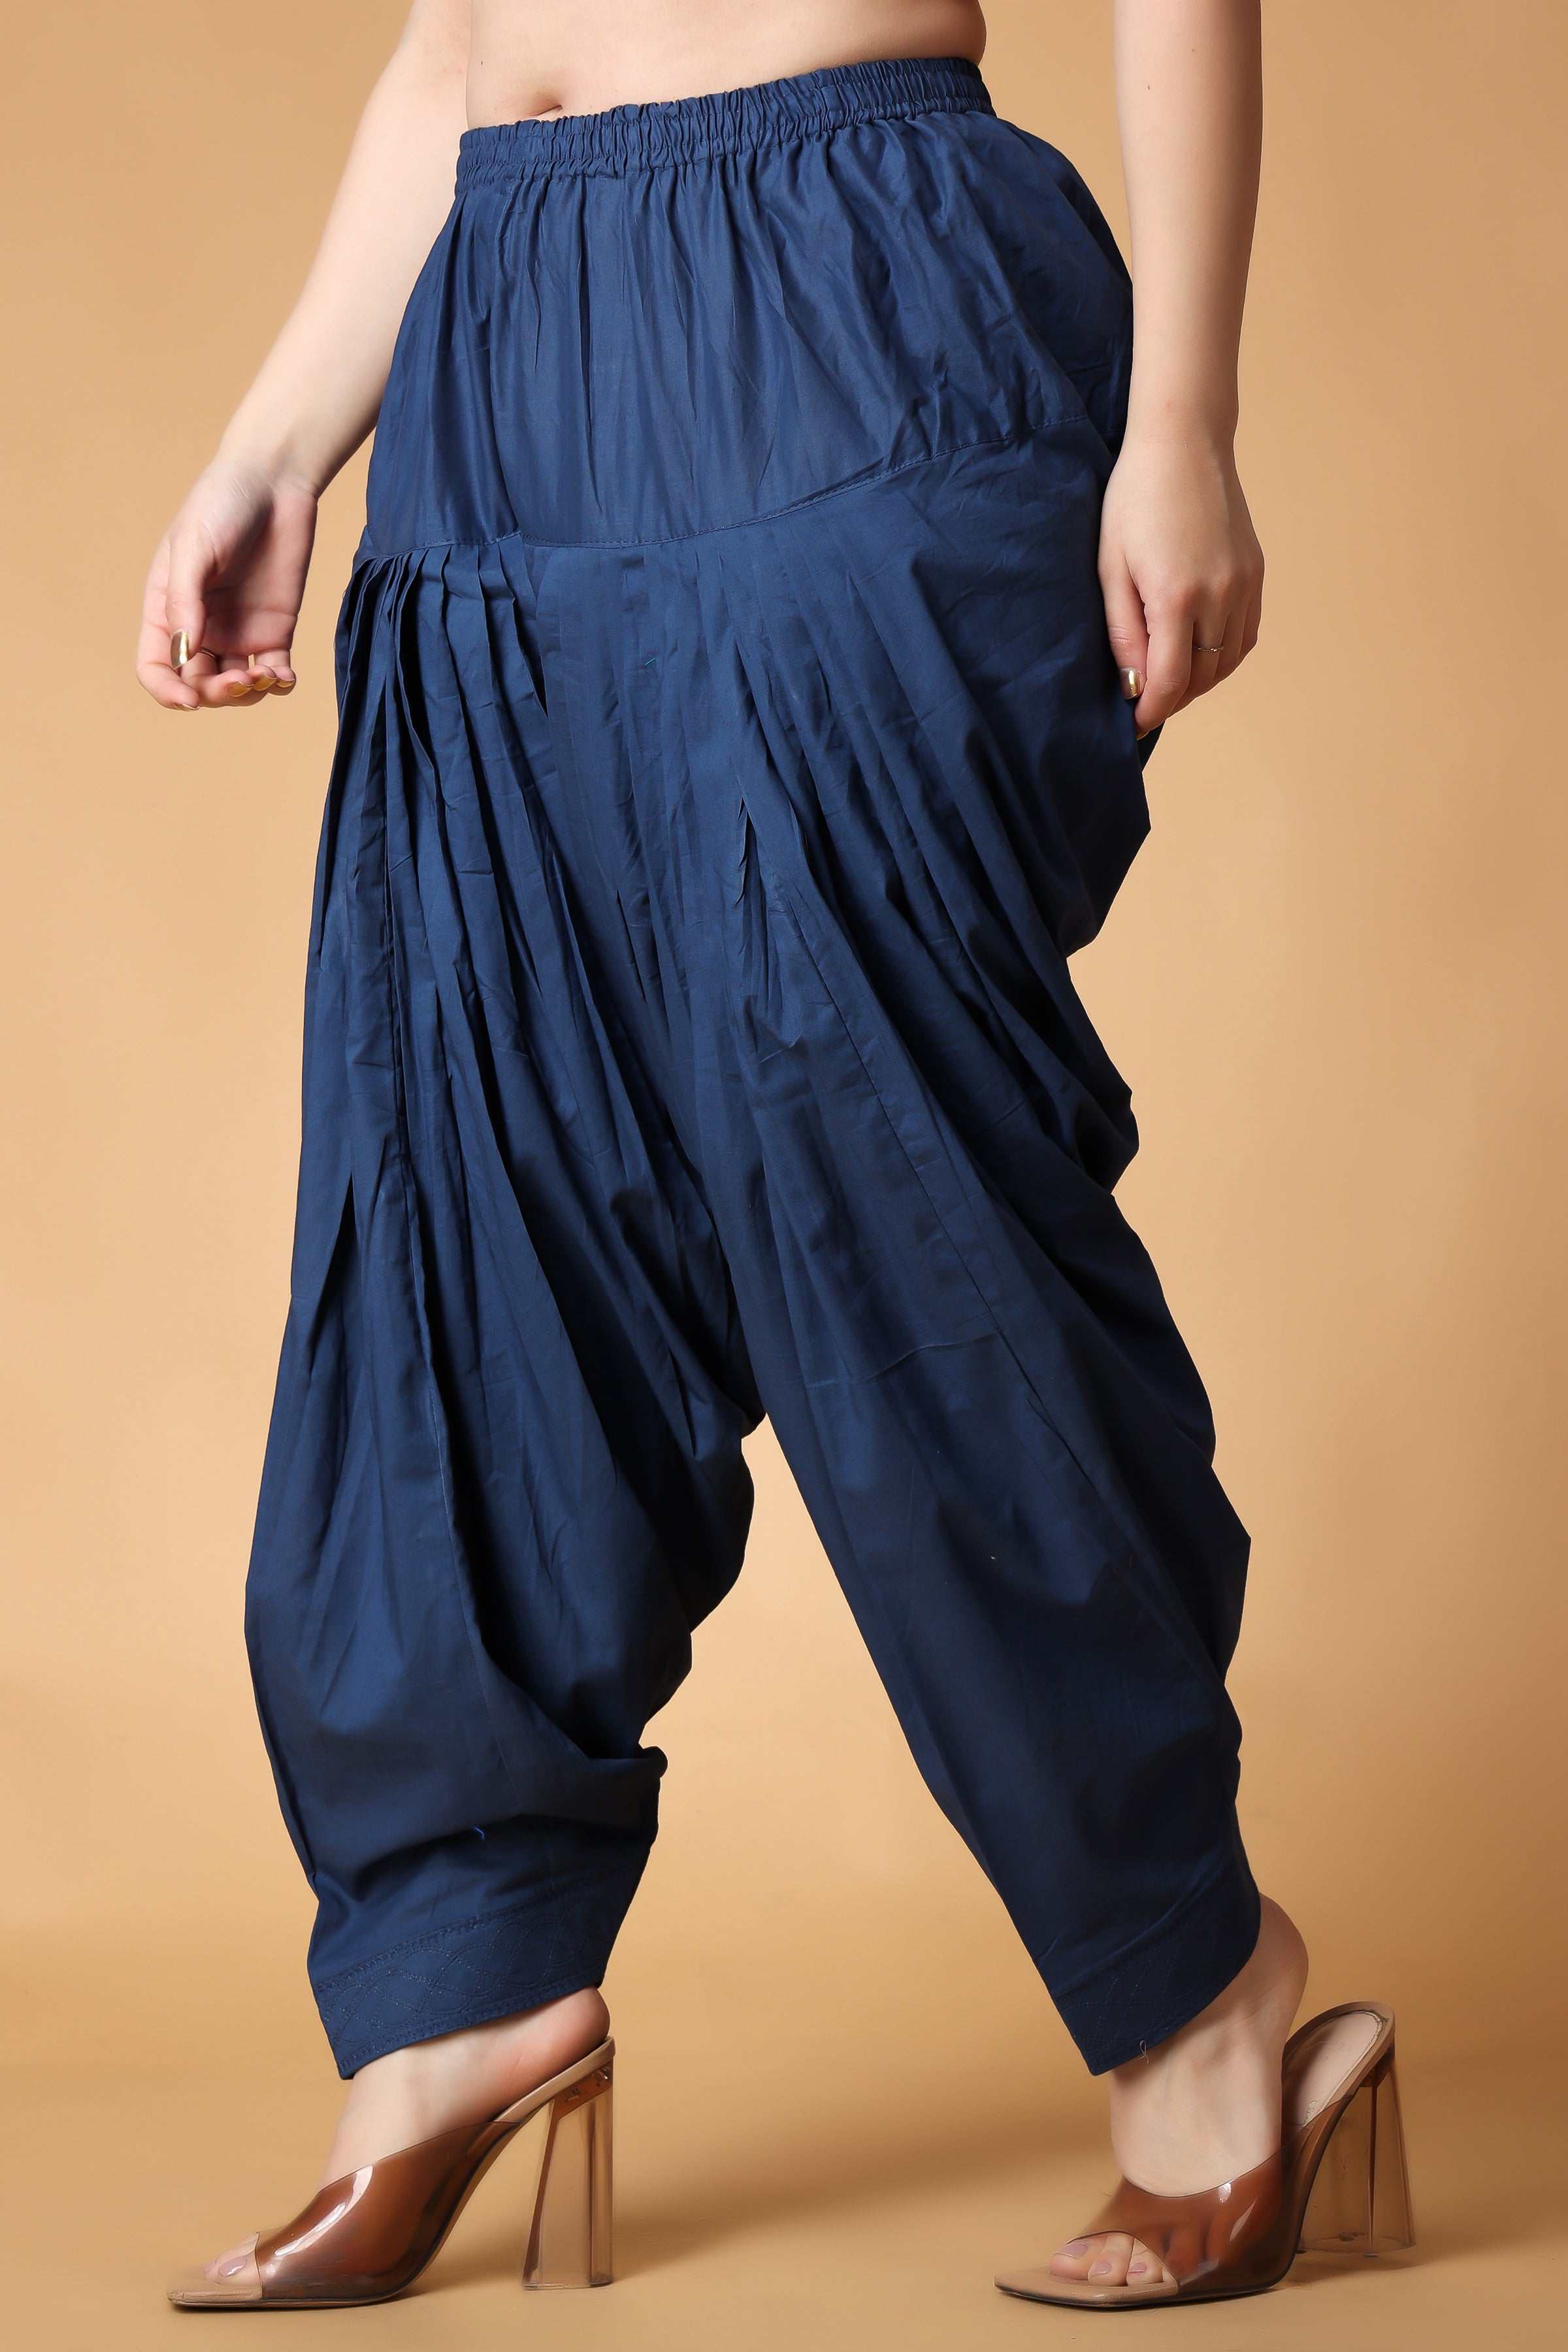 Stitched Cotton Patiala Pant, Waist Size: XXL at Rs 200/piece in Madurai |  ID: 2852454087273